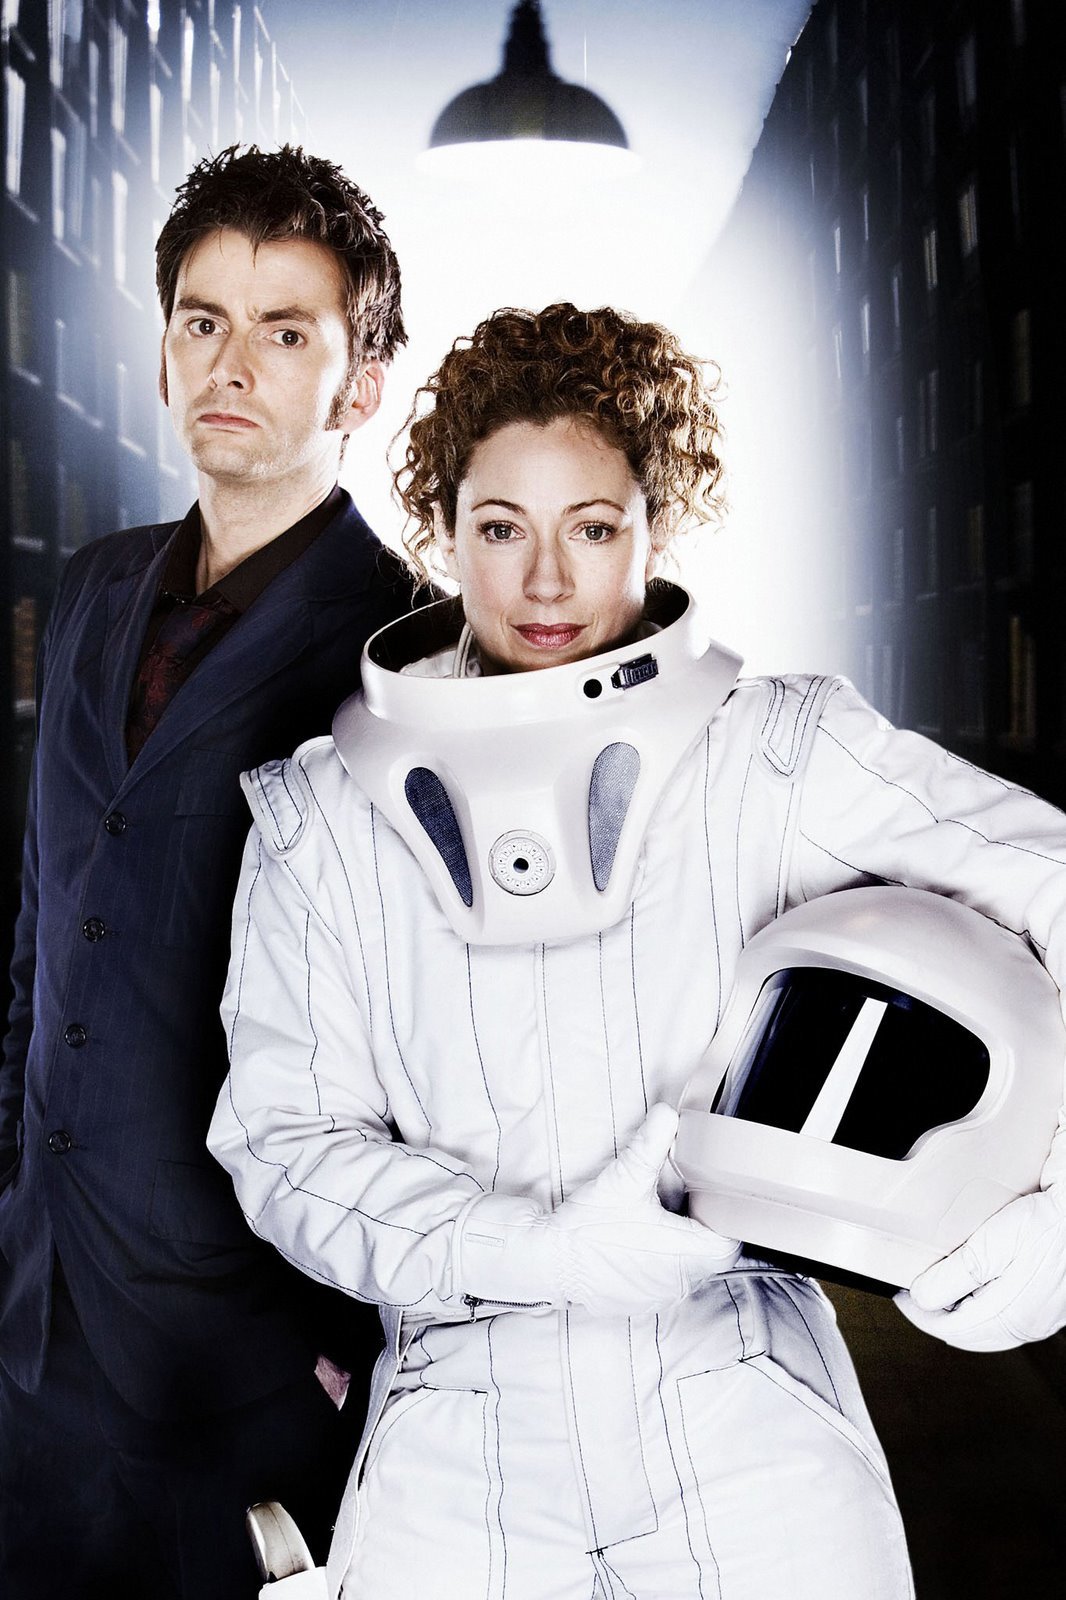 Doctor  Wallpaper on David Tennant Library Doctor Who River Song Alex Kingston Hd Wallpaper